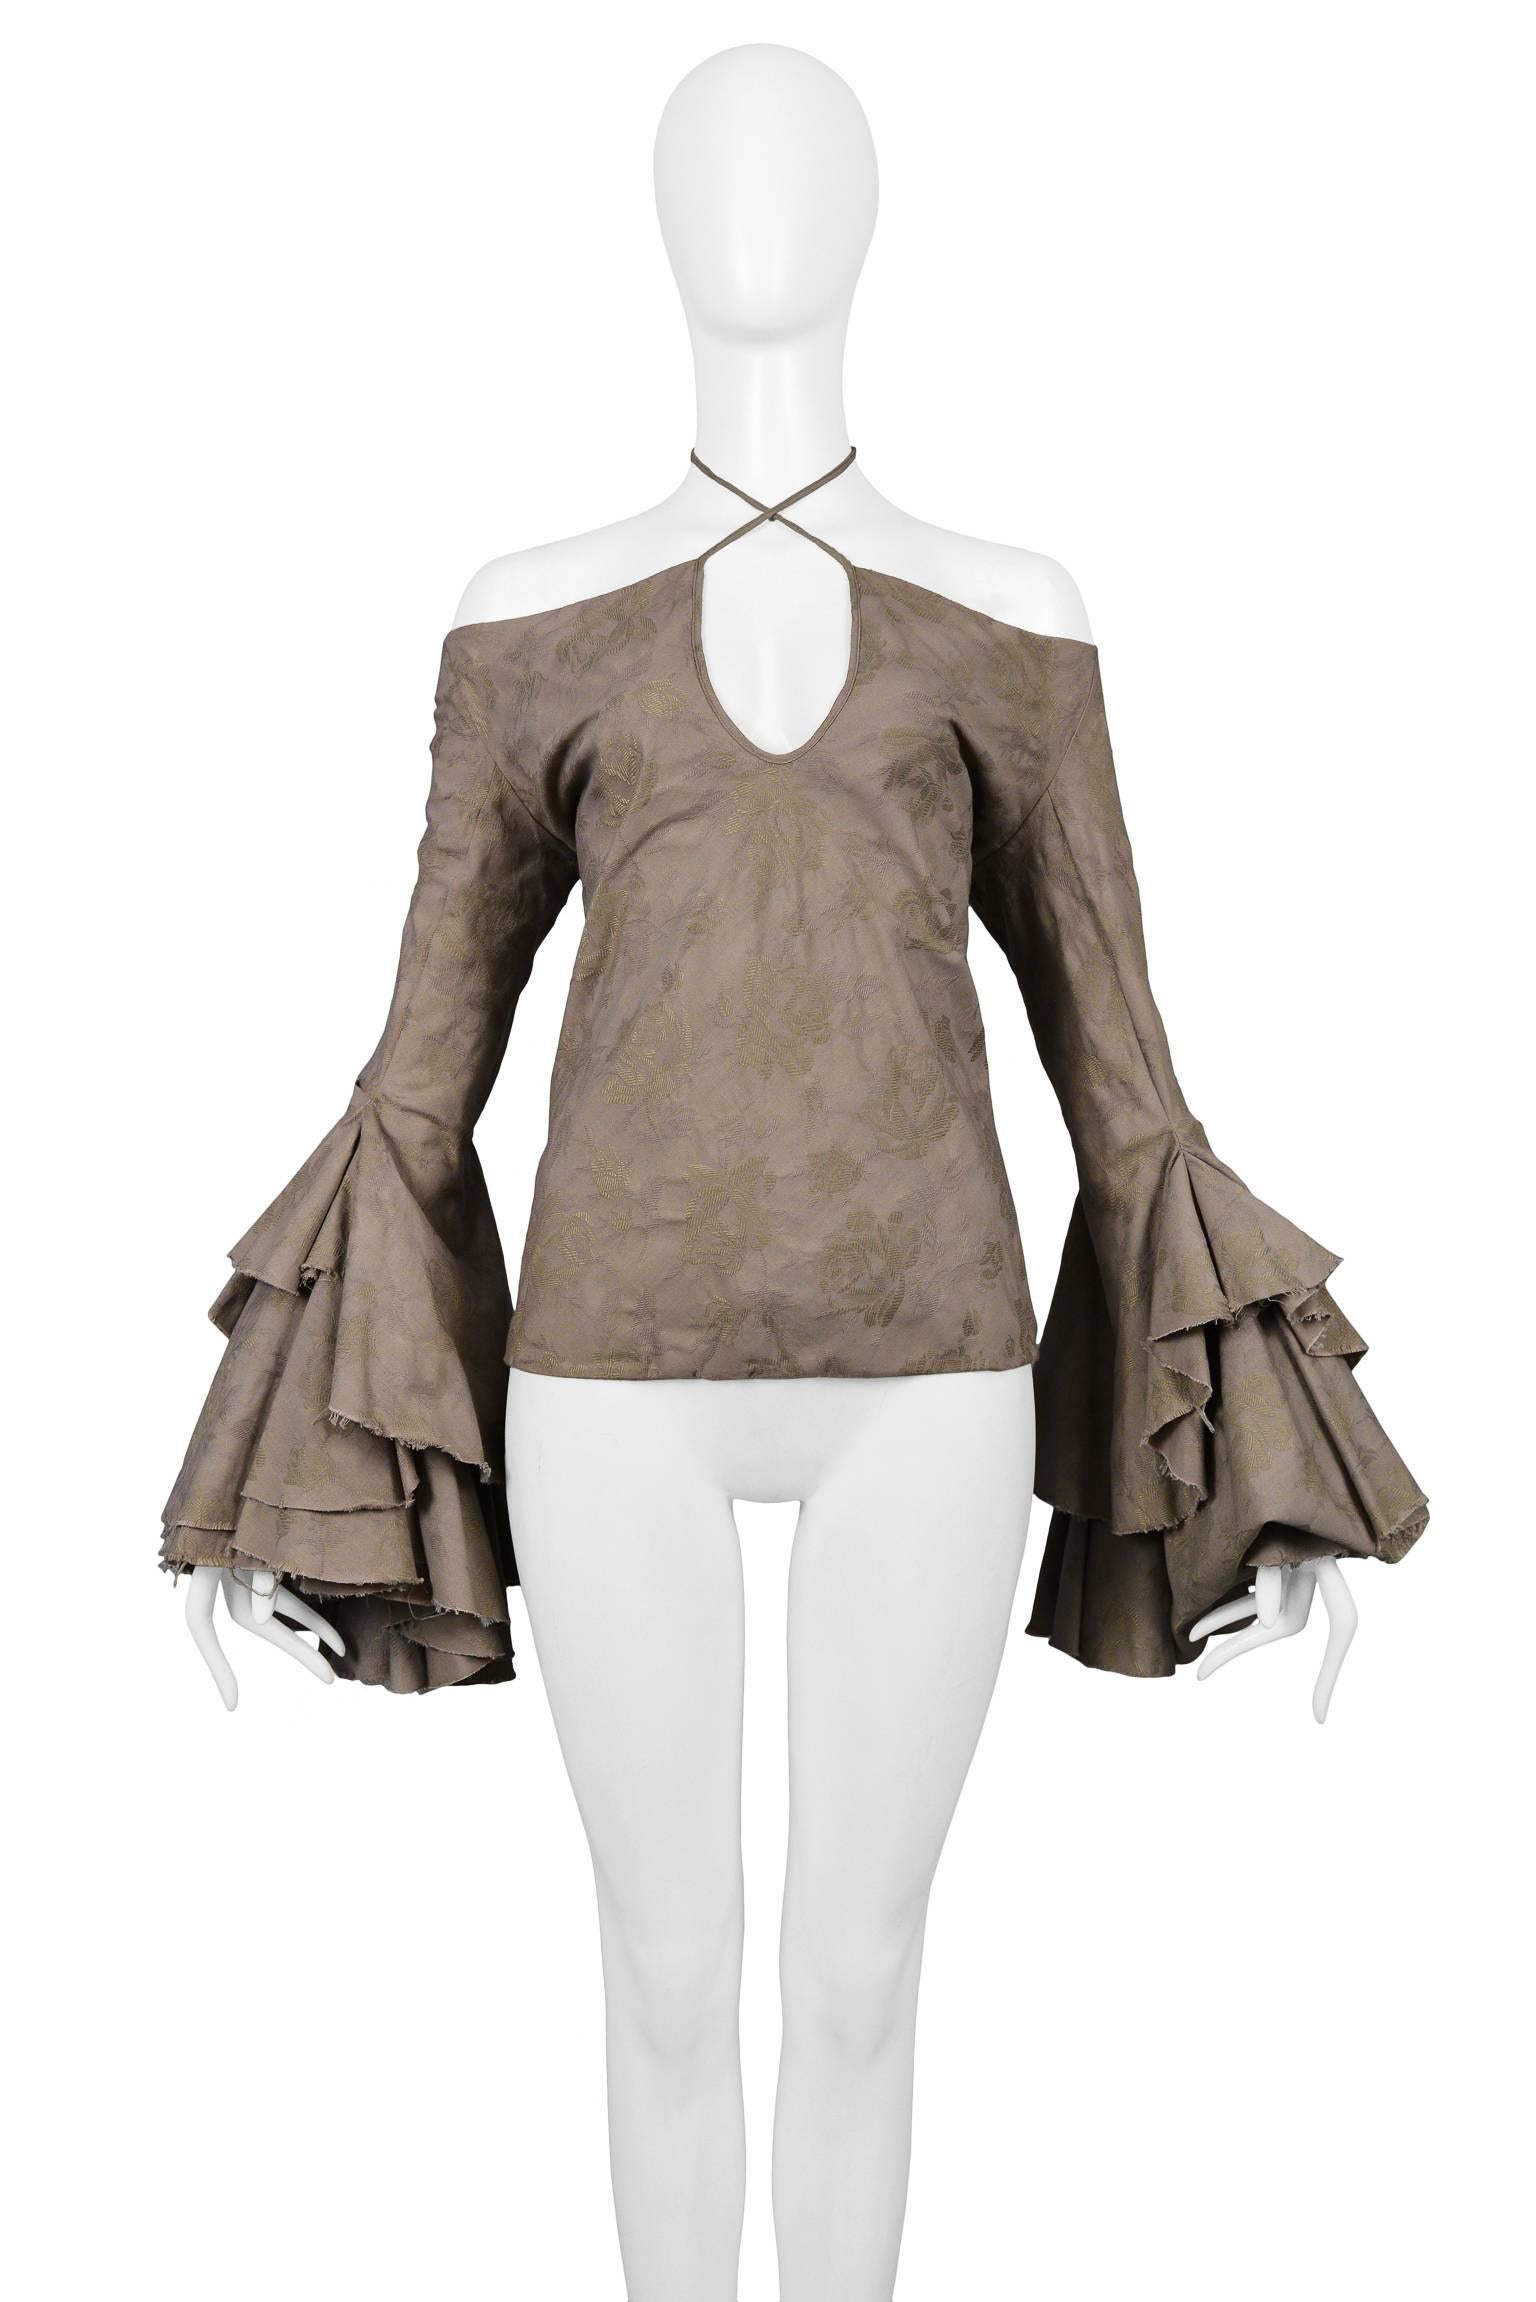 Vintage Alexander McQueen grey off the shoulder top with tonal flower pattern throughout, keyhole neckline, heavily ruffled sleeves, and raw edges. From the Dance Of The Twisted Bull Spring / Summer 2002 Collection. Featured on the runway. 

Please